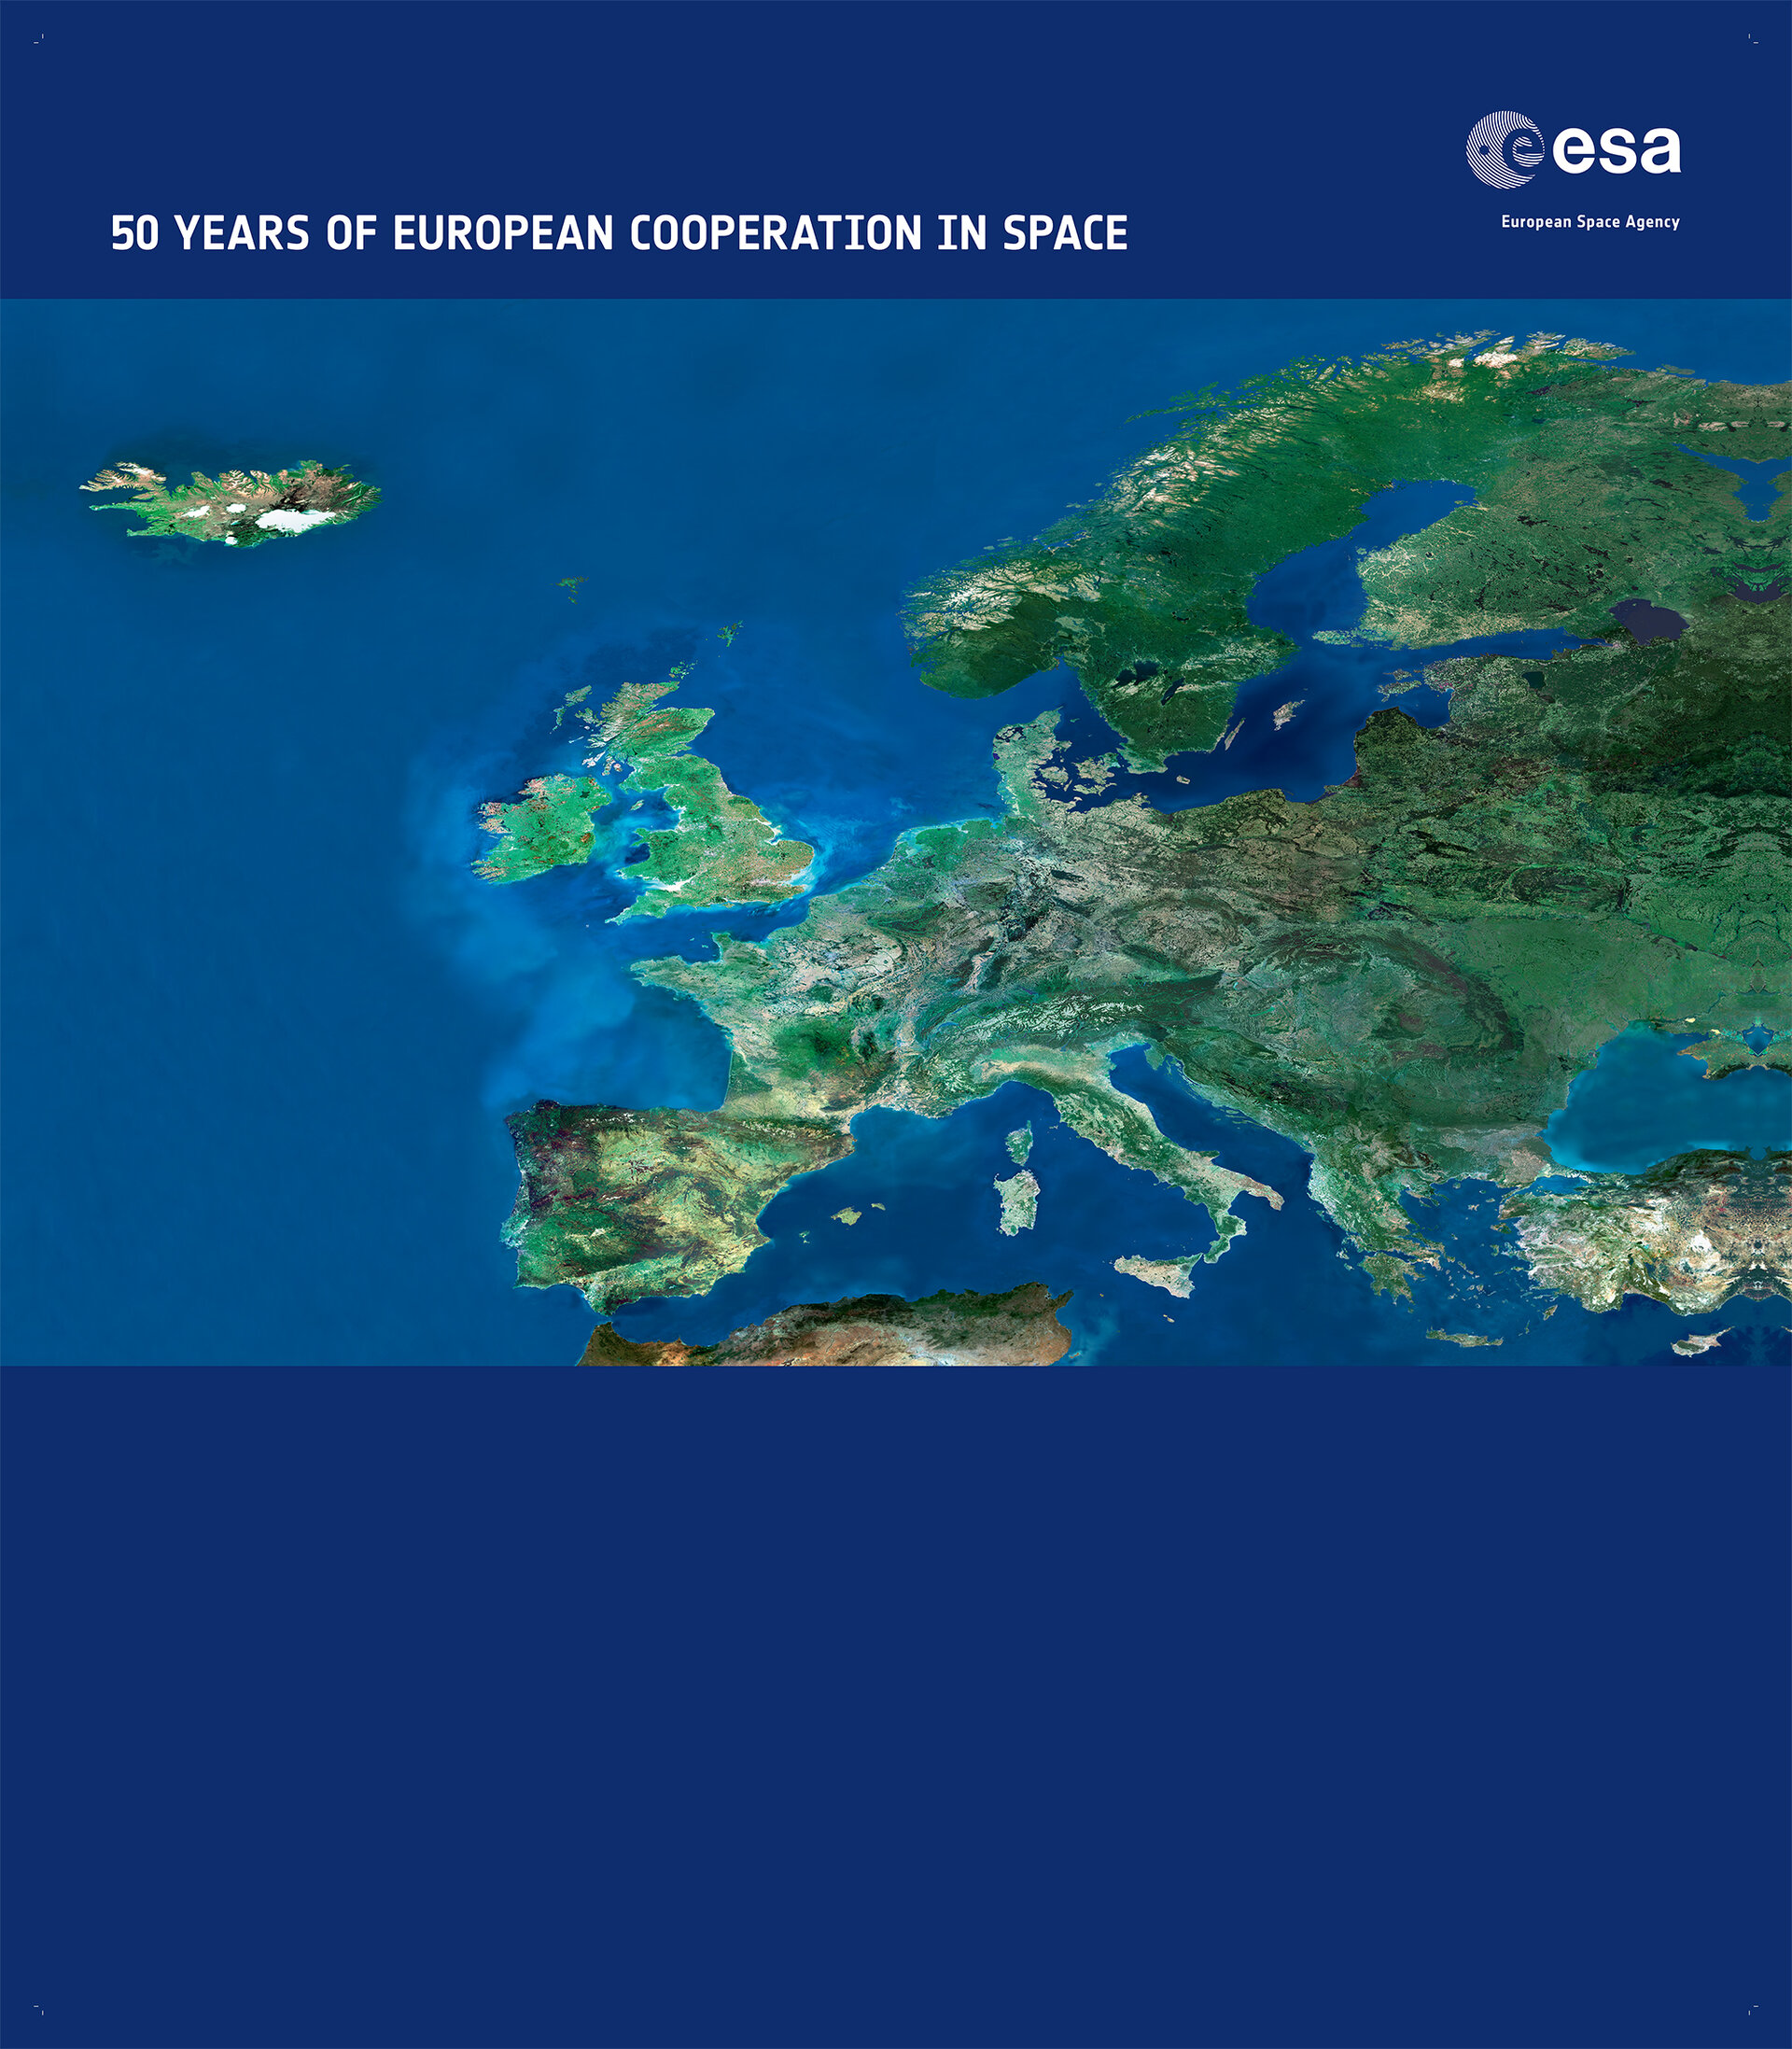 50 years of European cooperation in Space